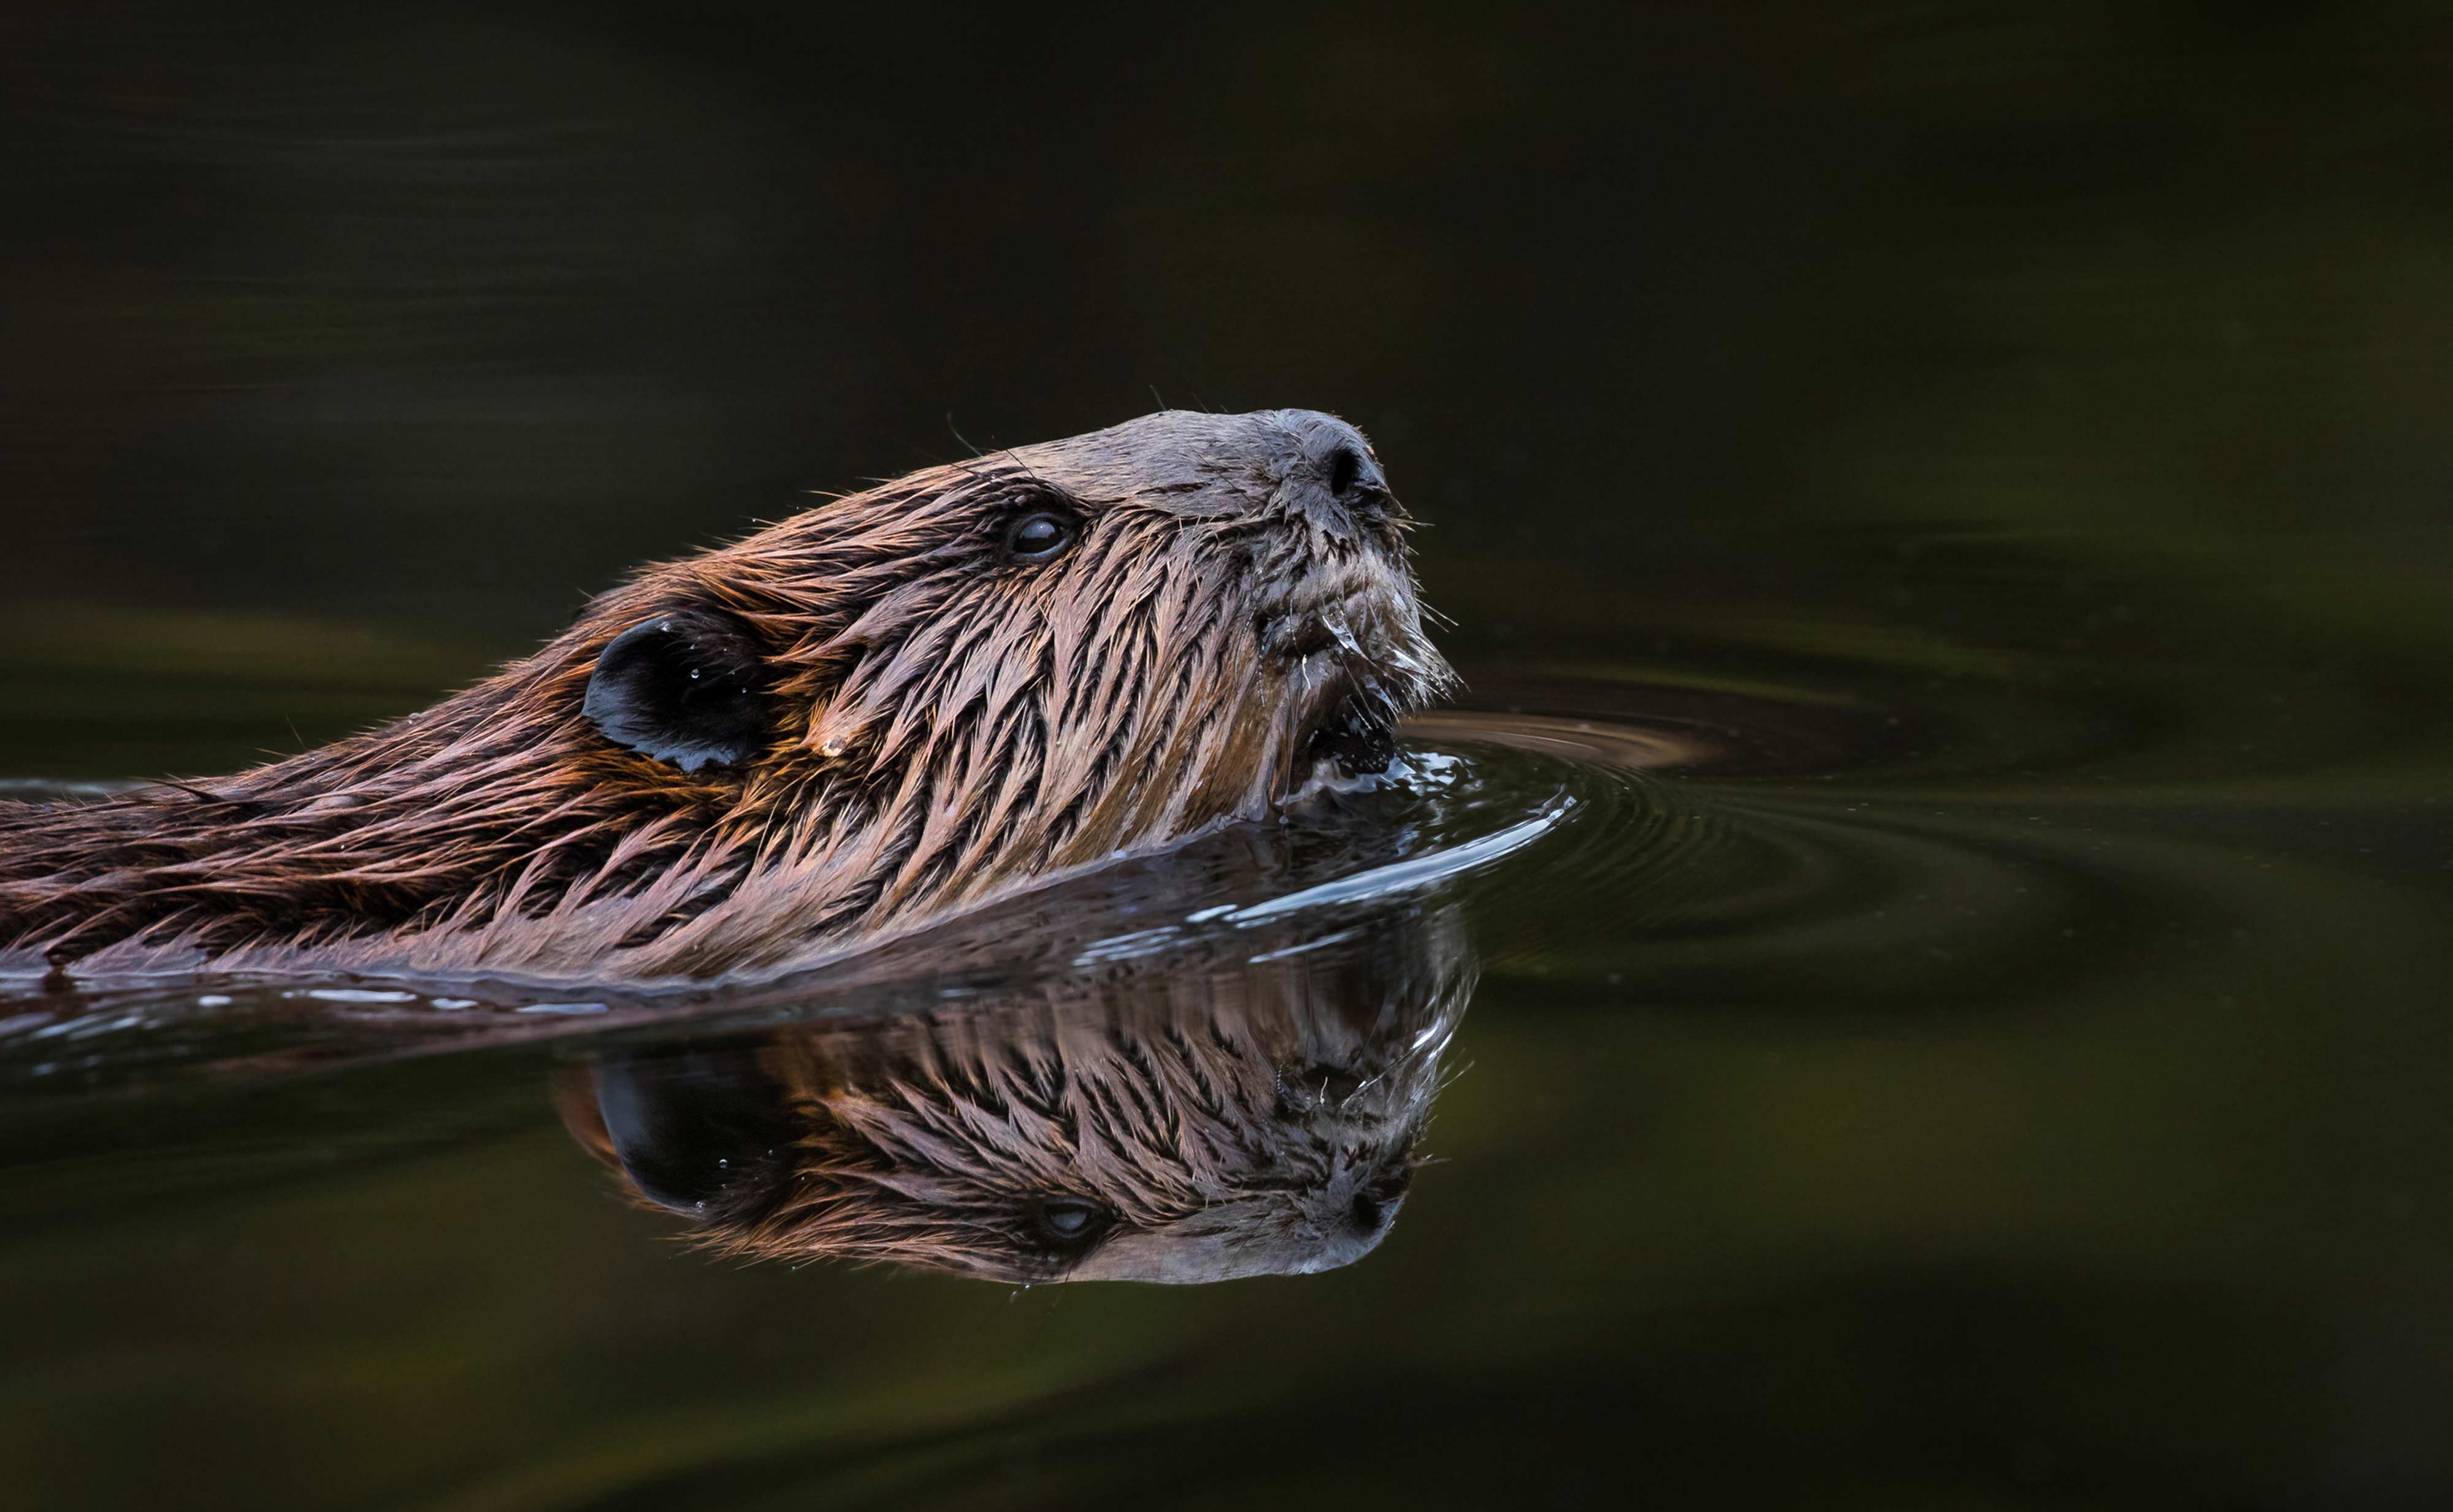 A beaver poking its head out of the water.